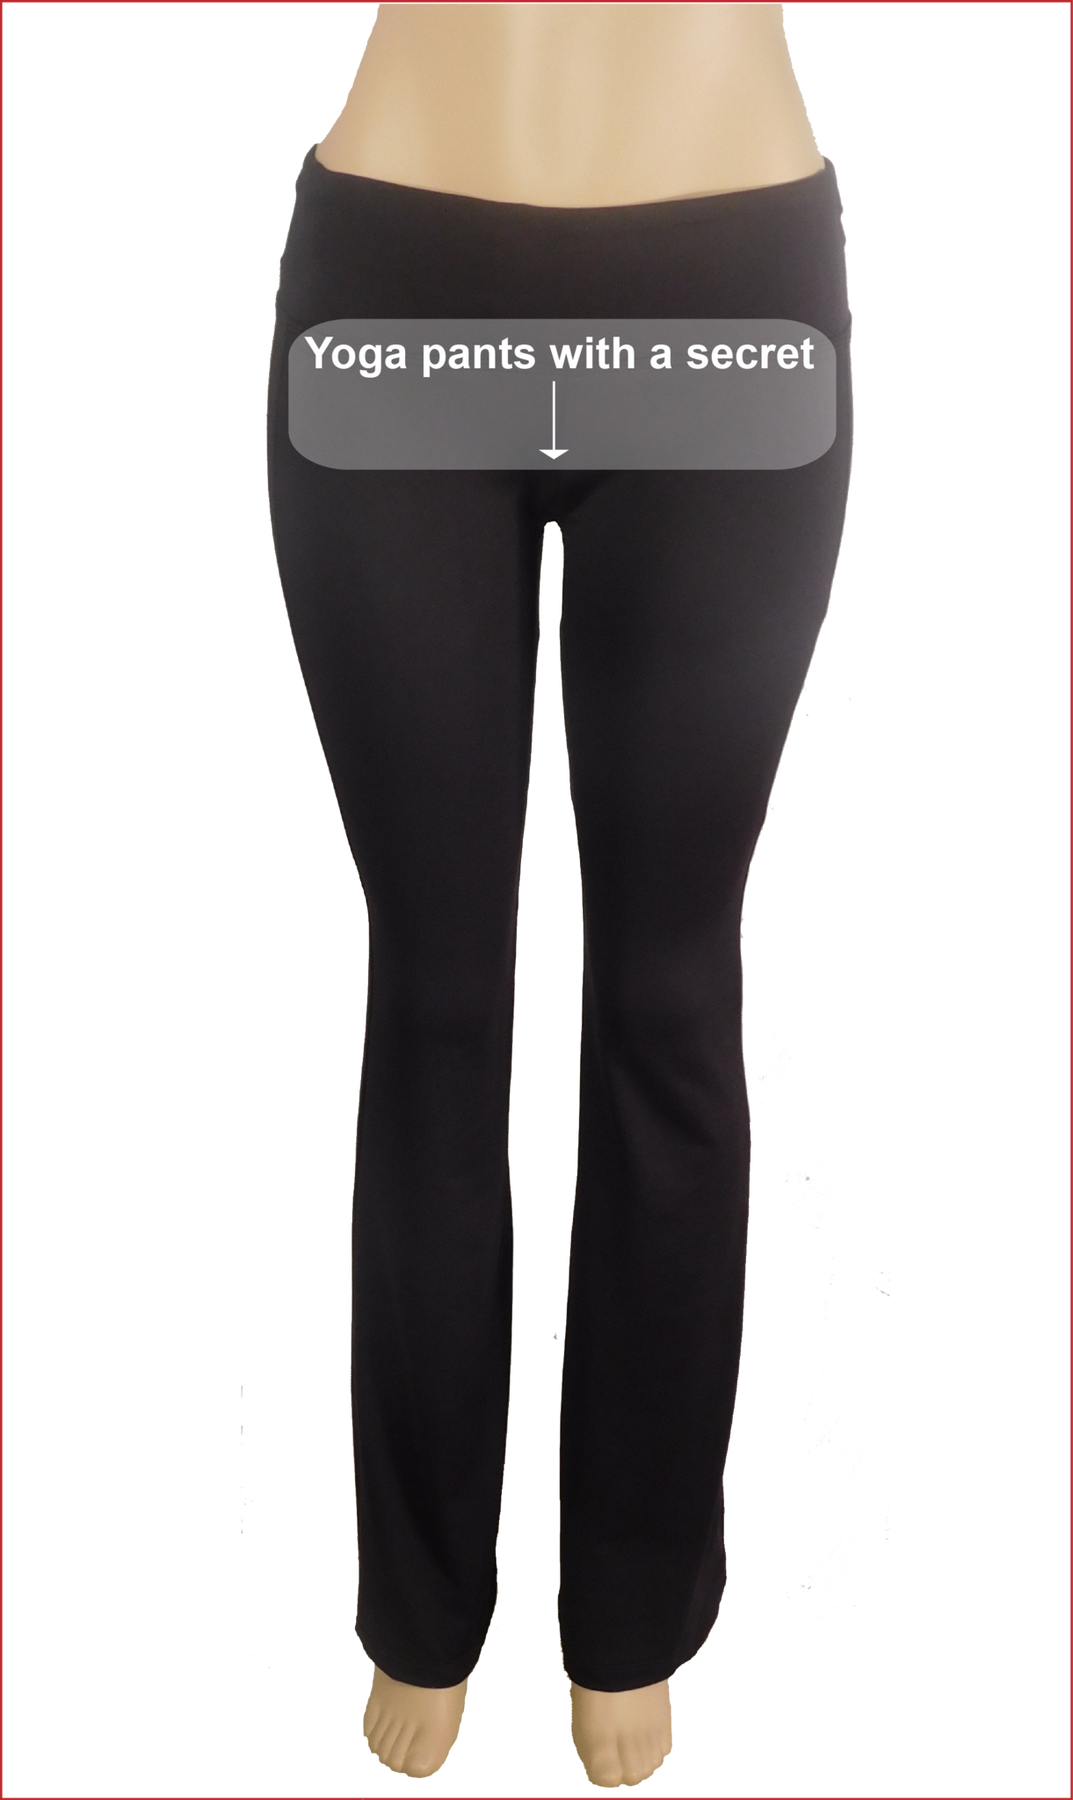 Buy Crotchless Yoga Pants. Weird and funny stuff online